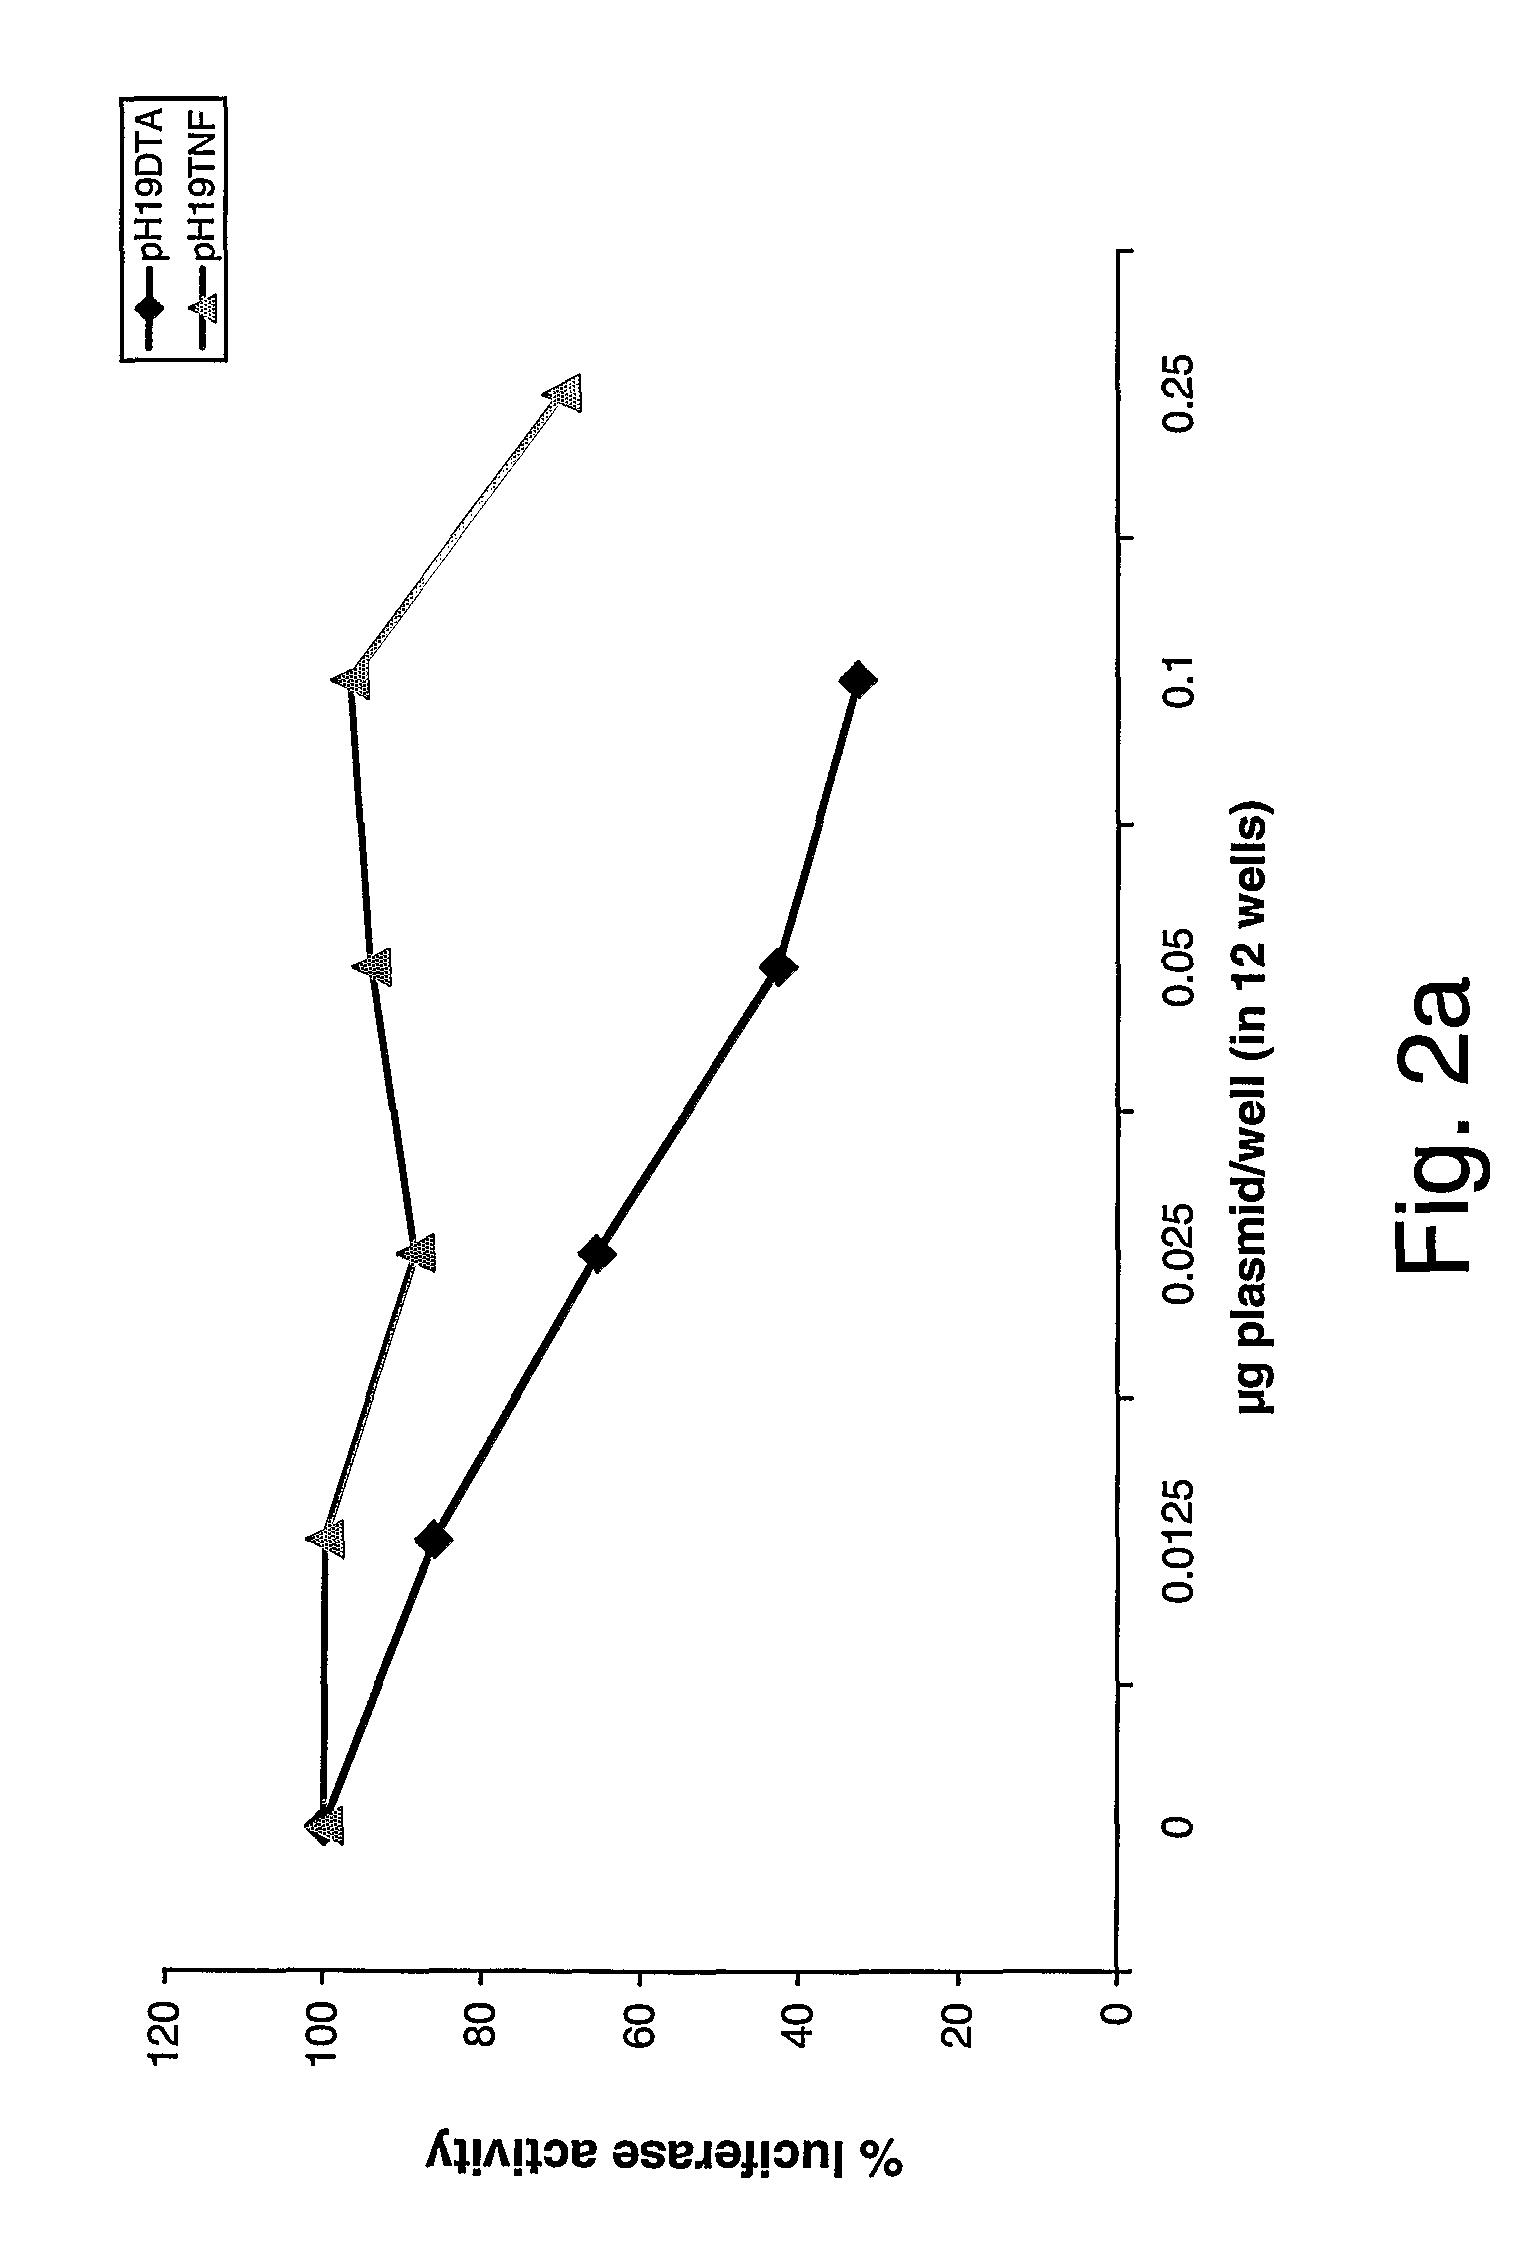 Nucleic acid constructs, pharmaceutical compositions and methods of using same for treating cancer